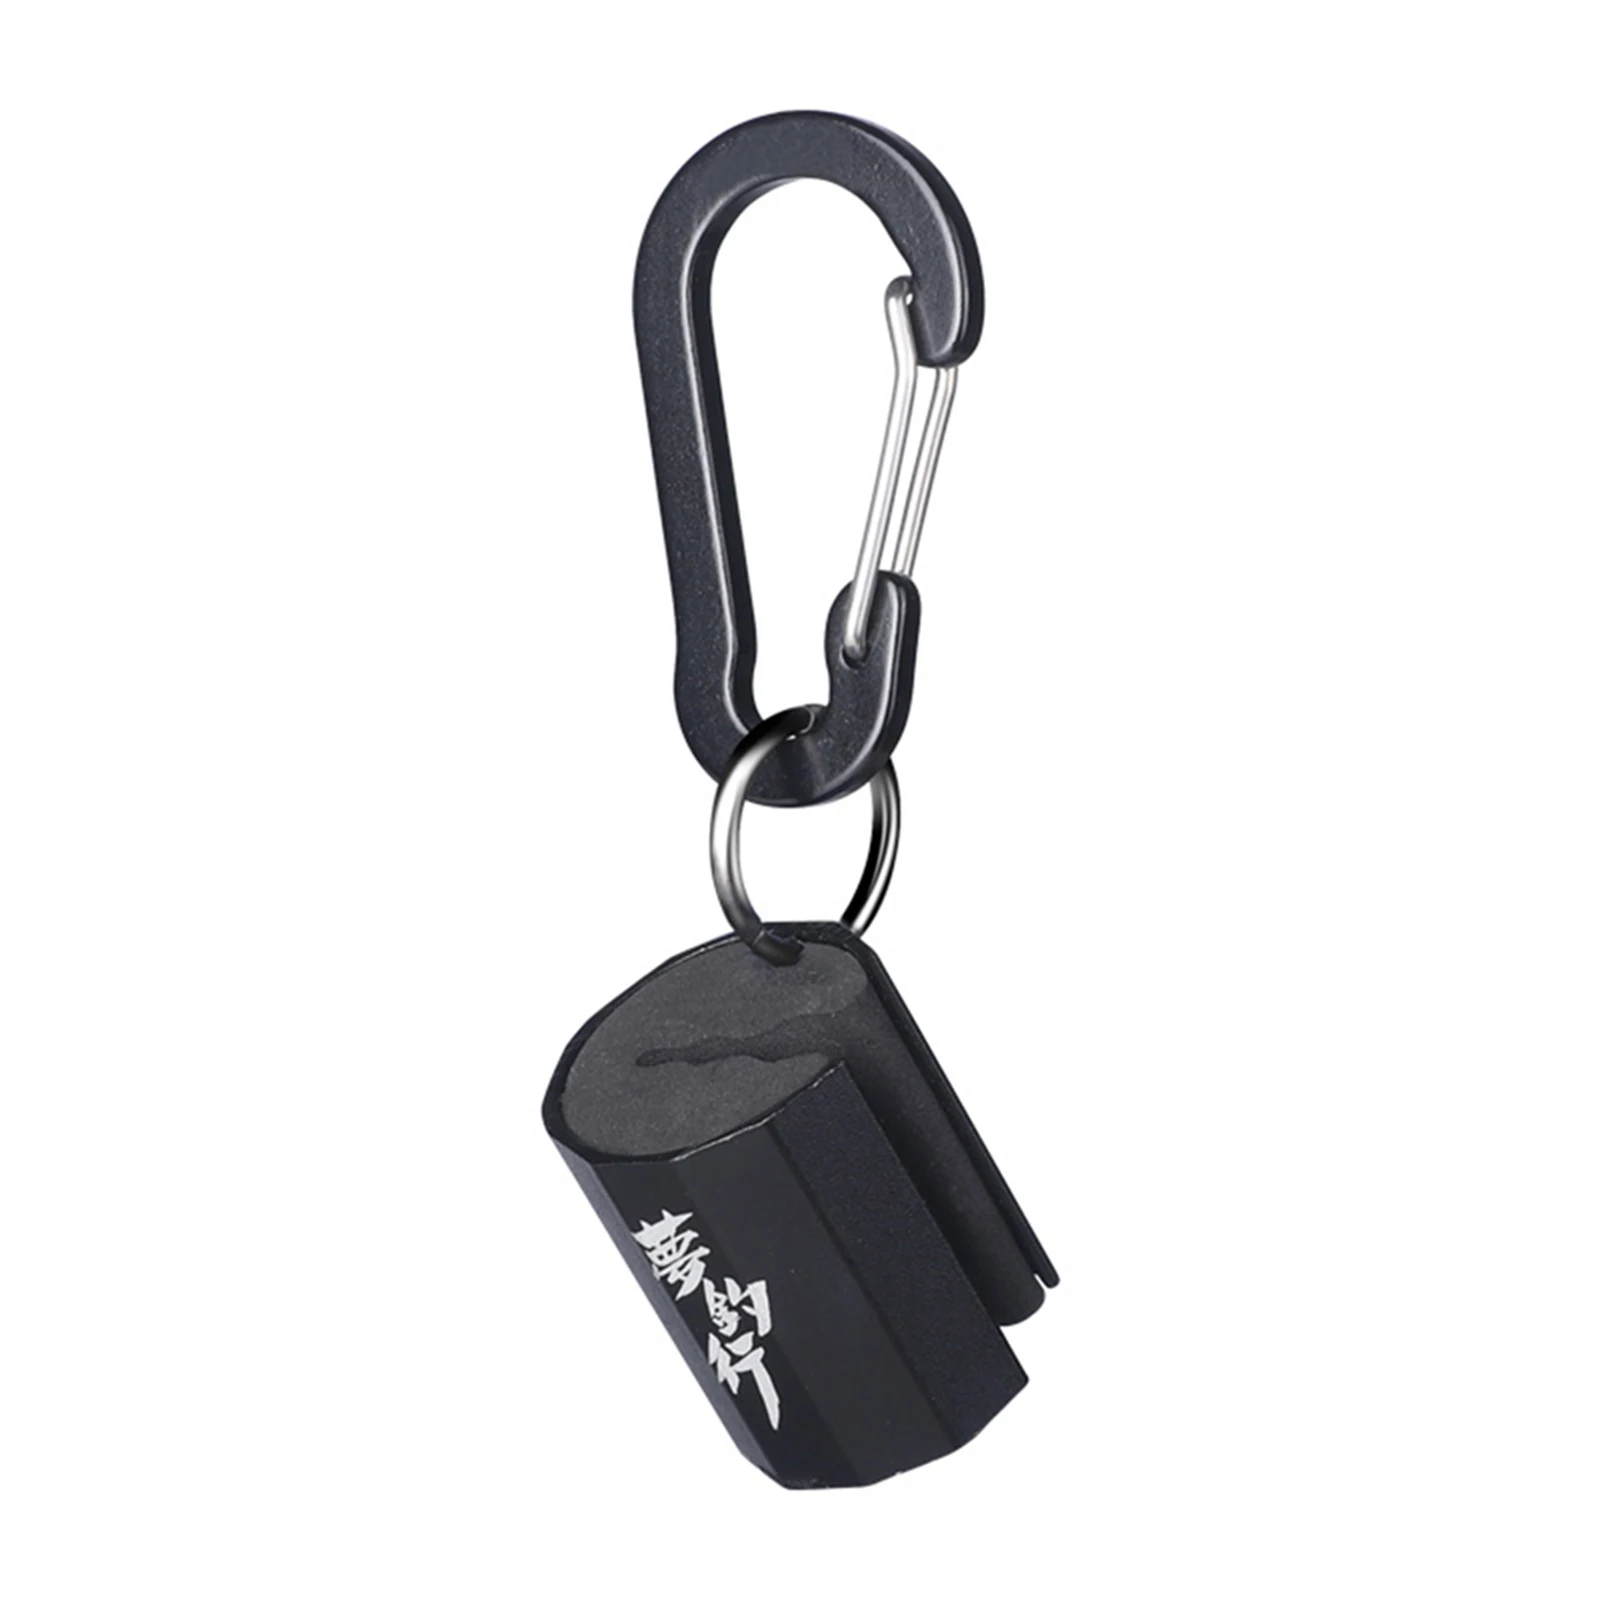 Fishing Rod Holder Wearable Pole Hanging Clamp Device Portable Fishing Rod Clip With Keychain Fishing Accessories samsfx fishing rod holder tie belt wrap straps suspenders fastener neoprene fishing tackle tools accessories